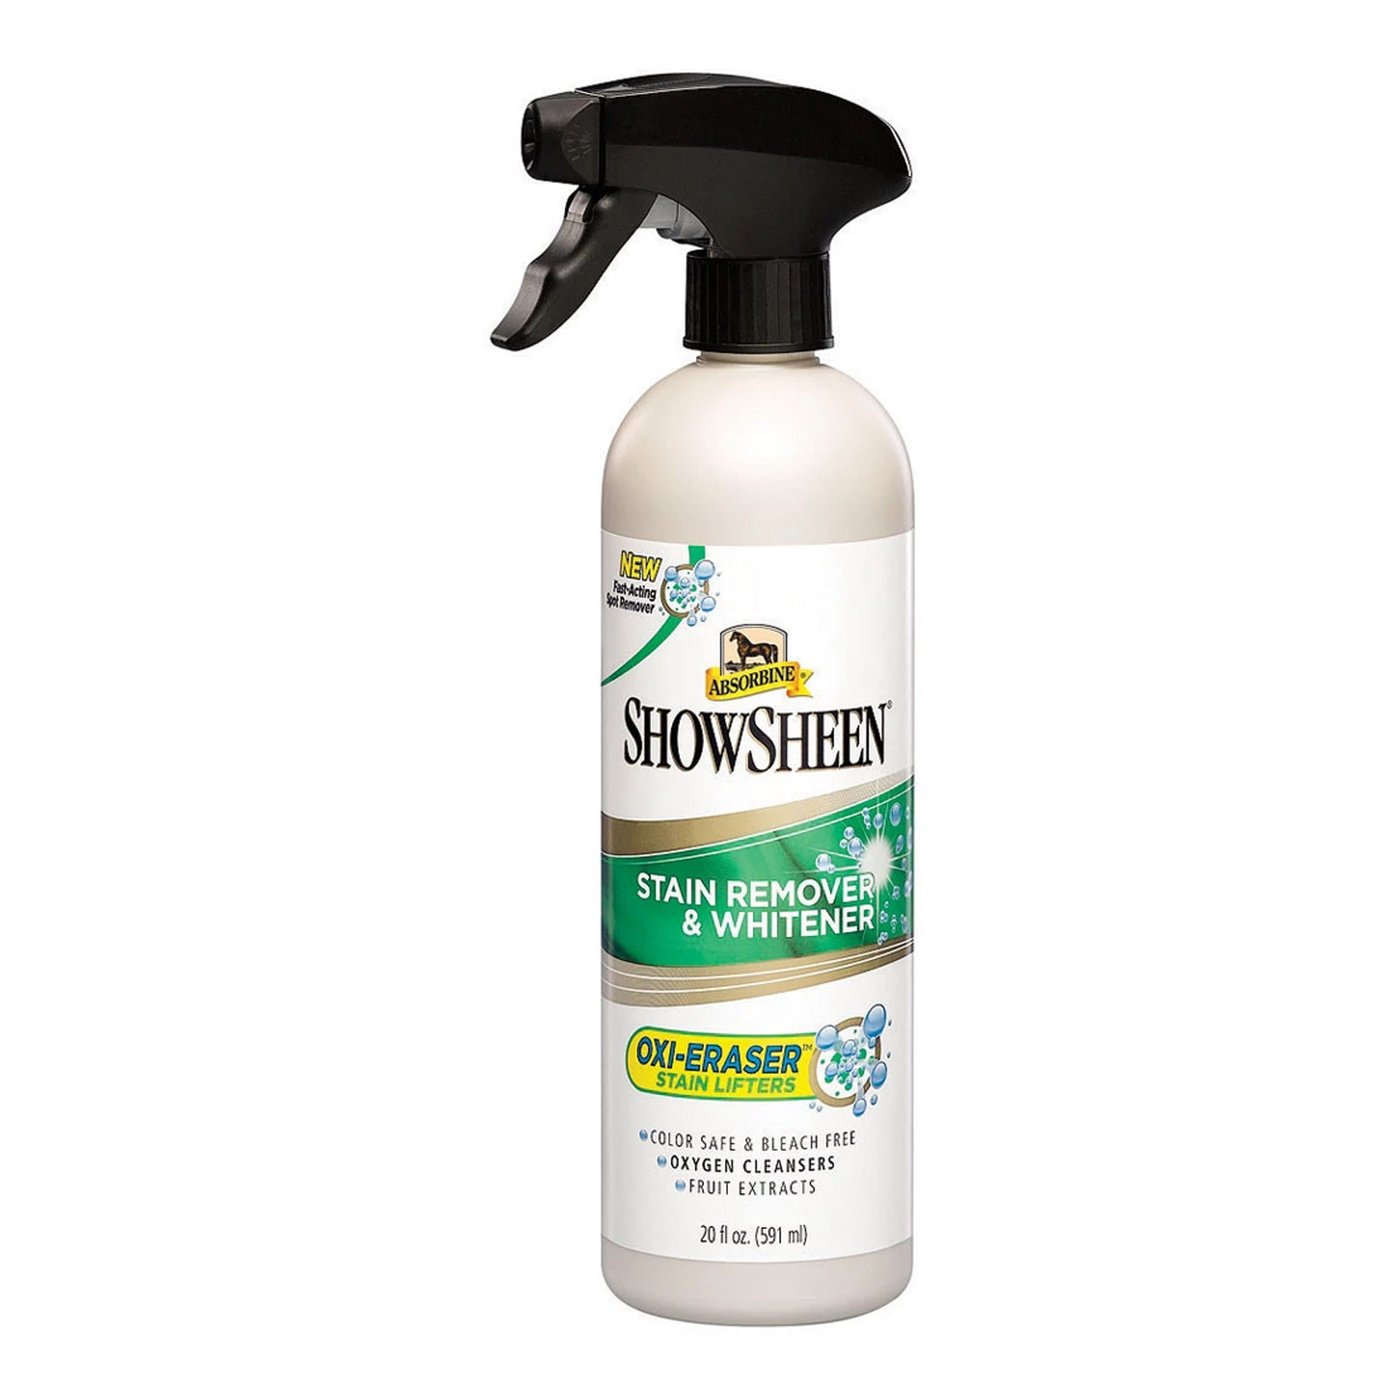 Absorbine Show Sheen Stain Remover & Whitener